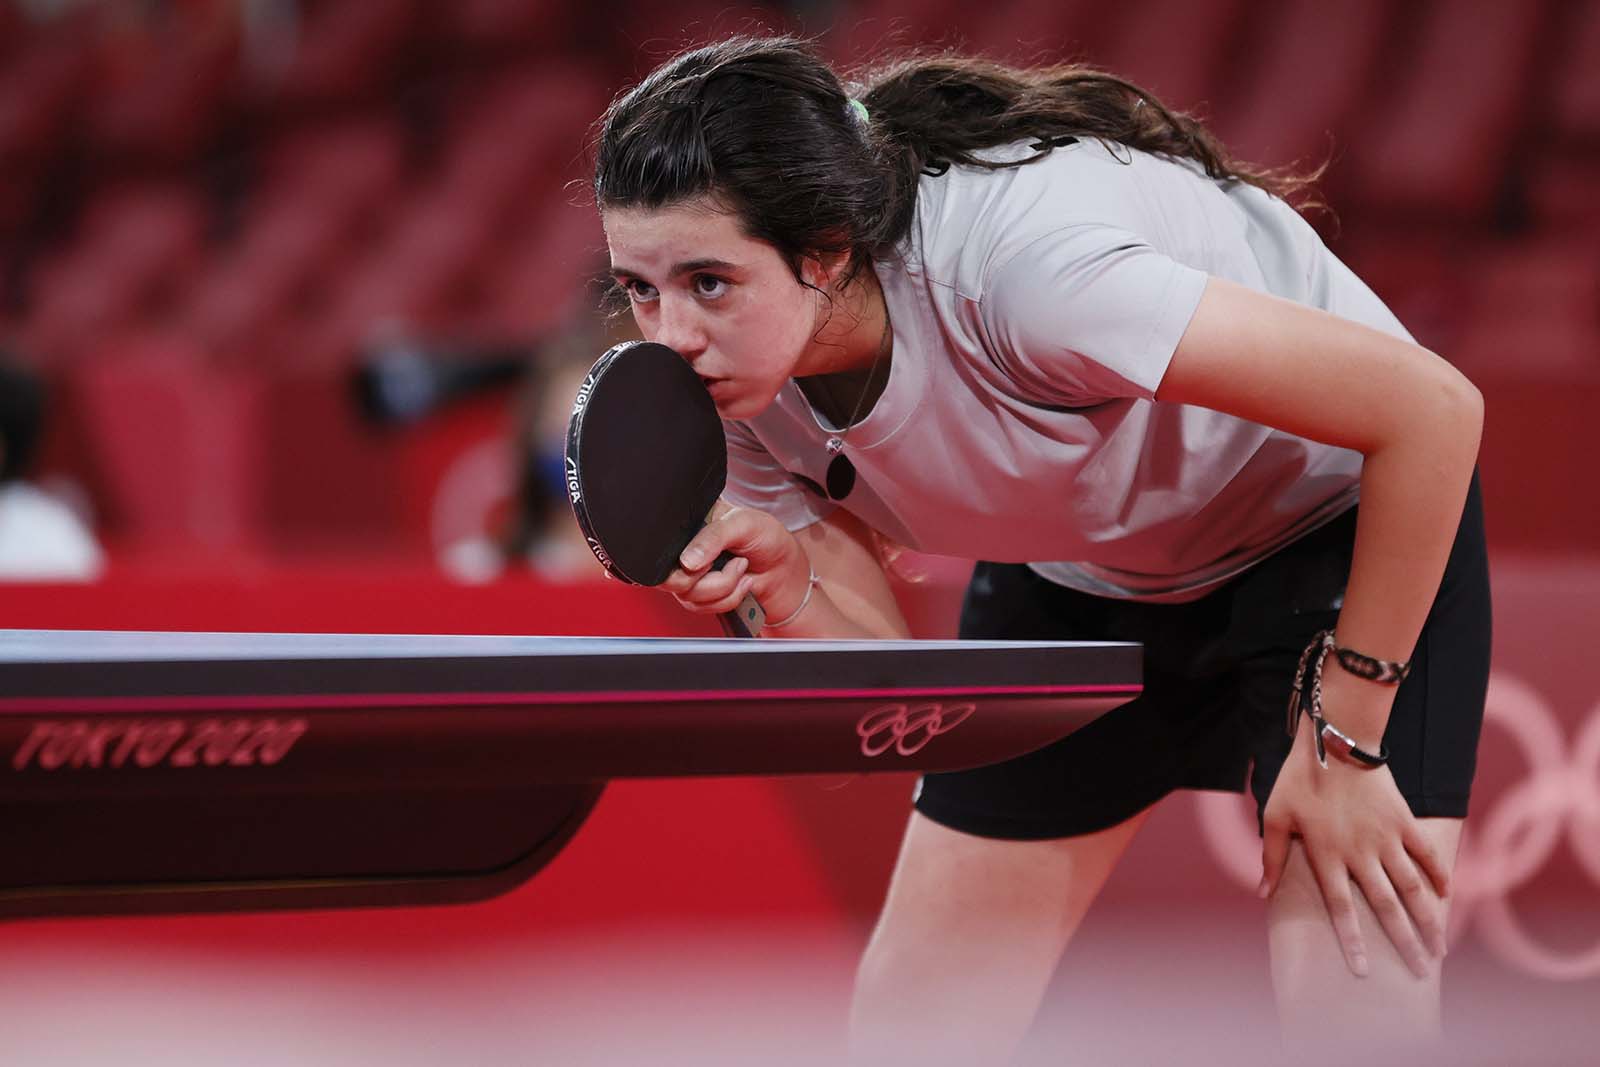 Hend Zaza of Team Syria is seen in action during the women's singles preliminary round table tennis match on July 24, in Tokyo.